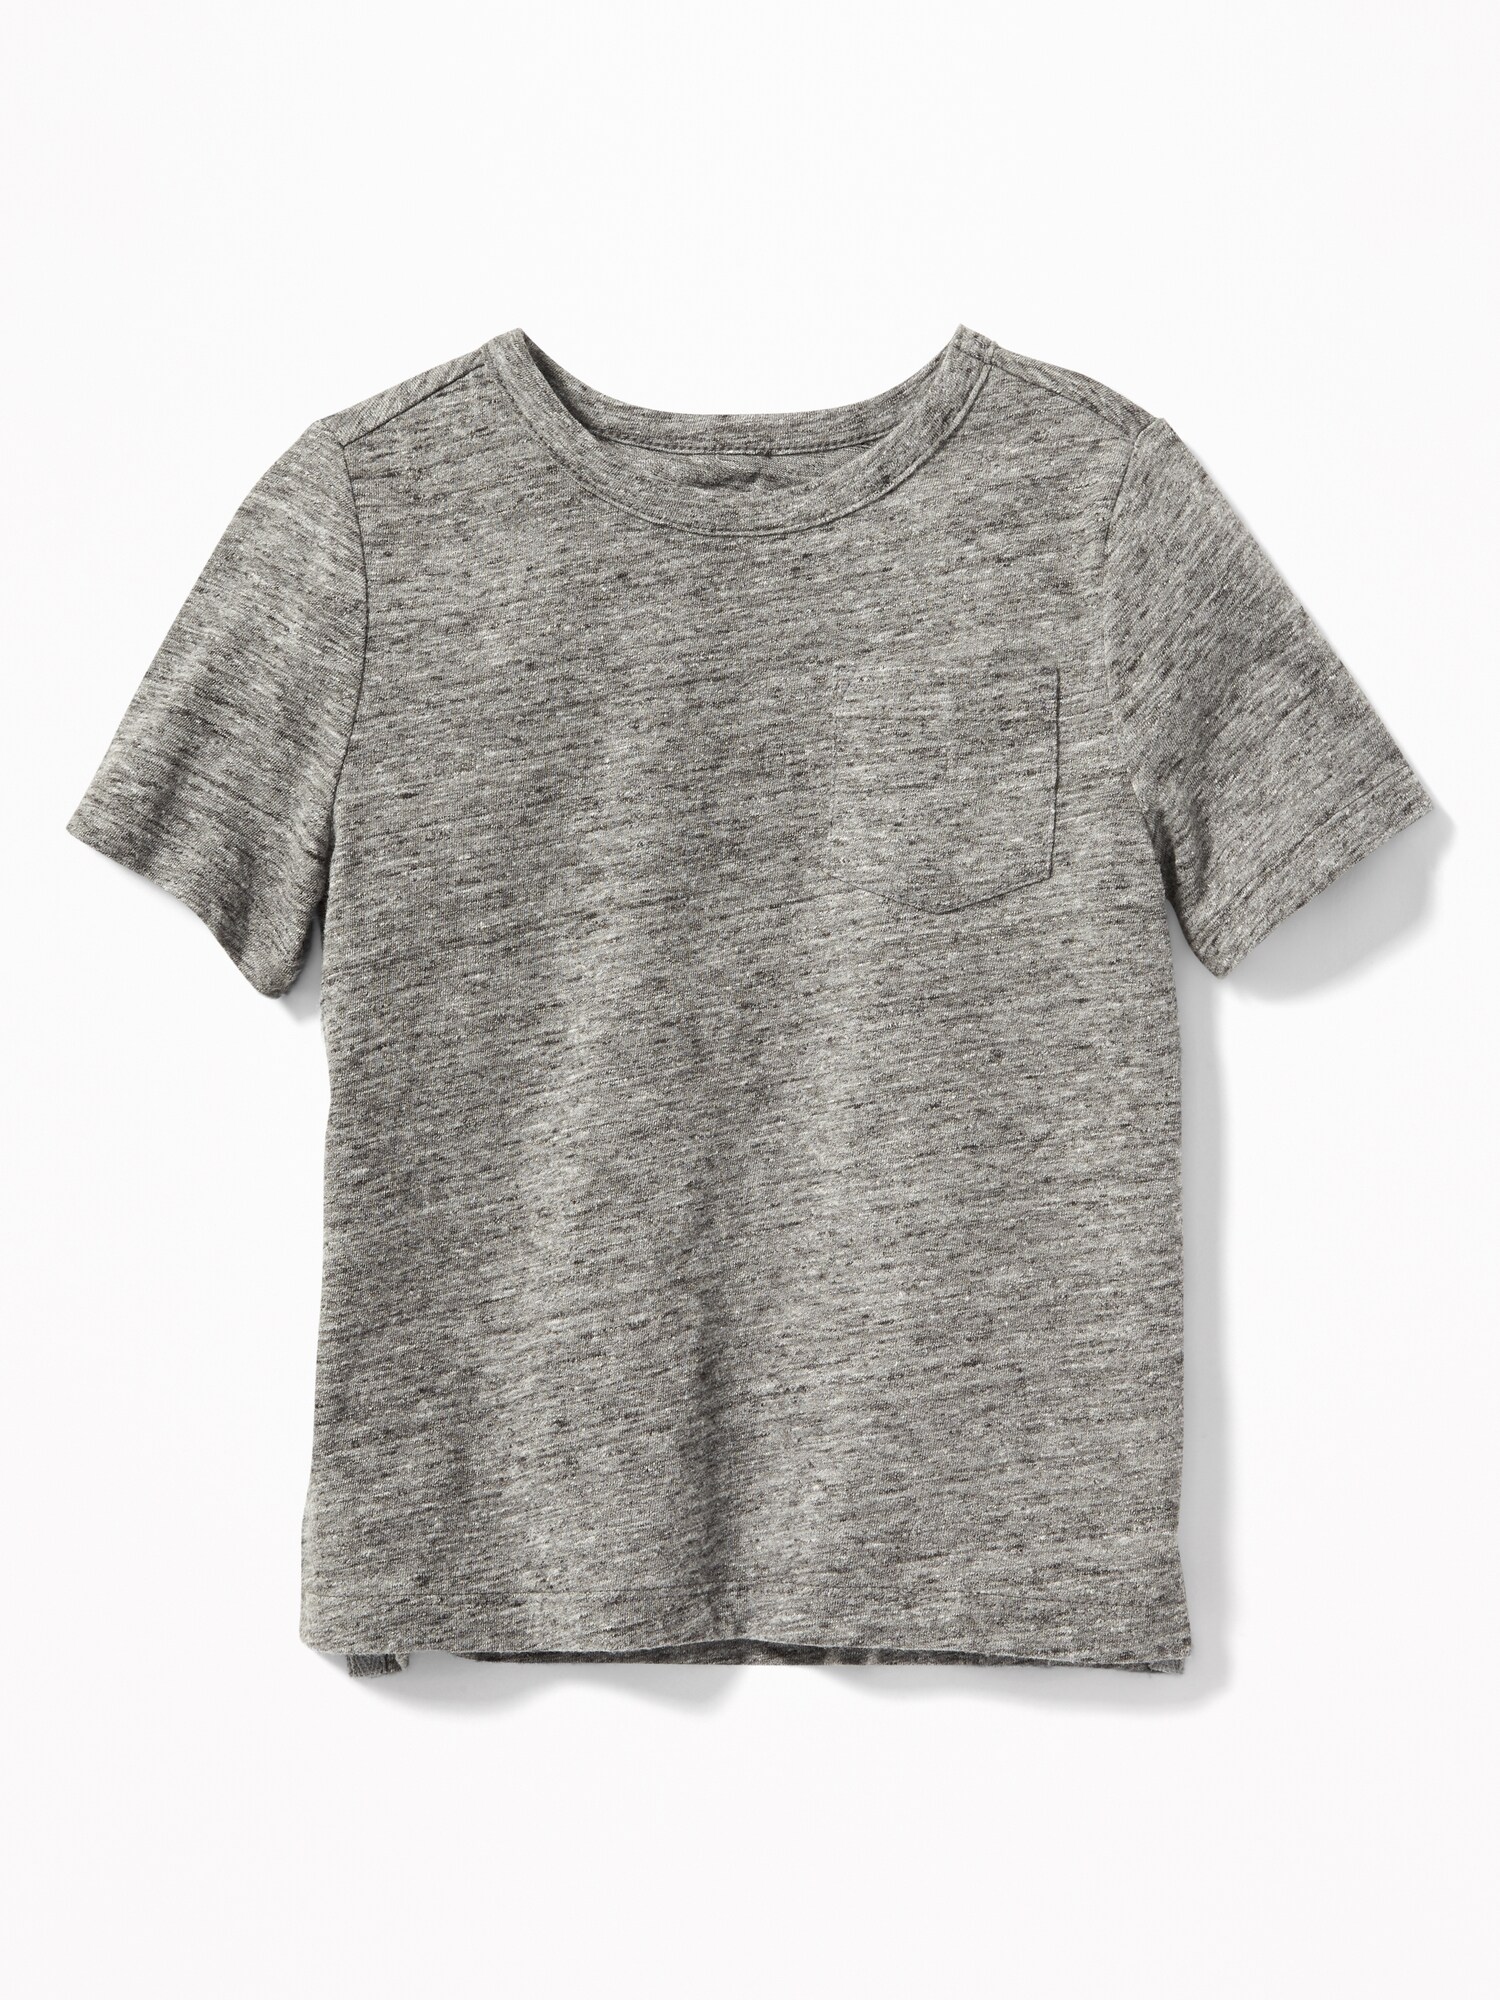 Crew-Neck Pocket Tee for Toddler Boys | Old Navy